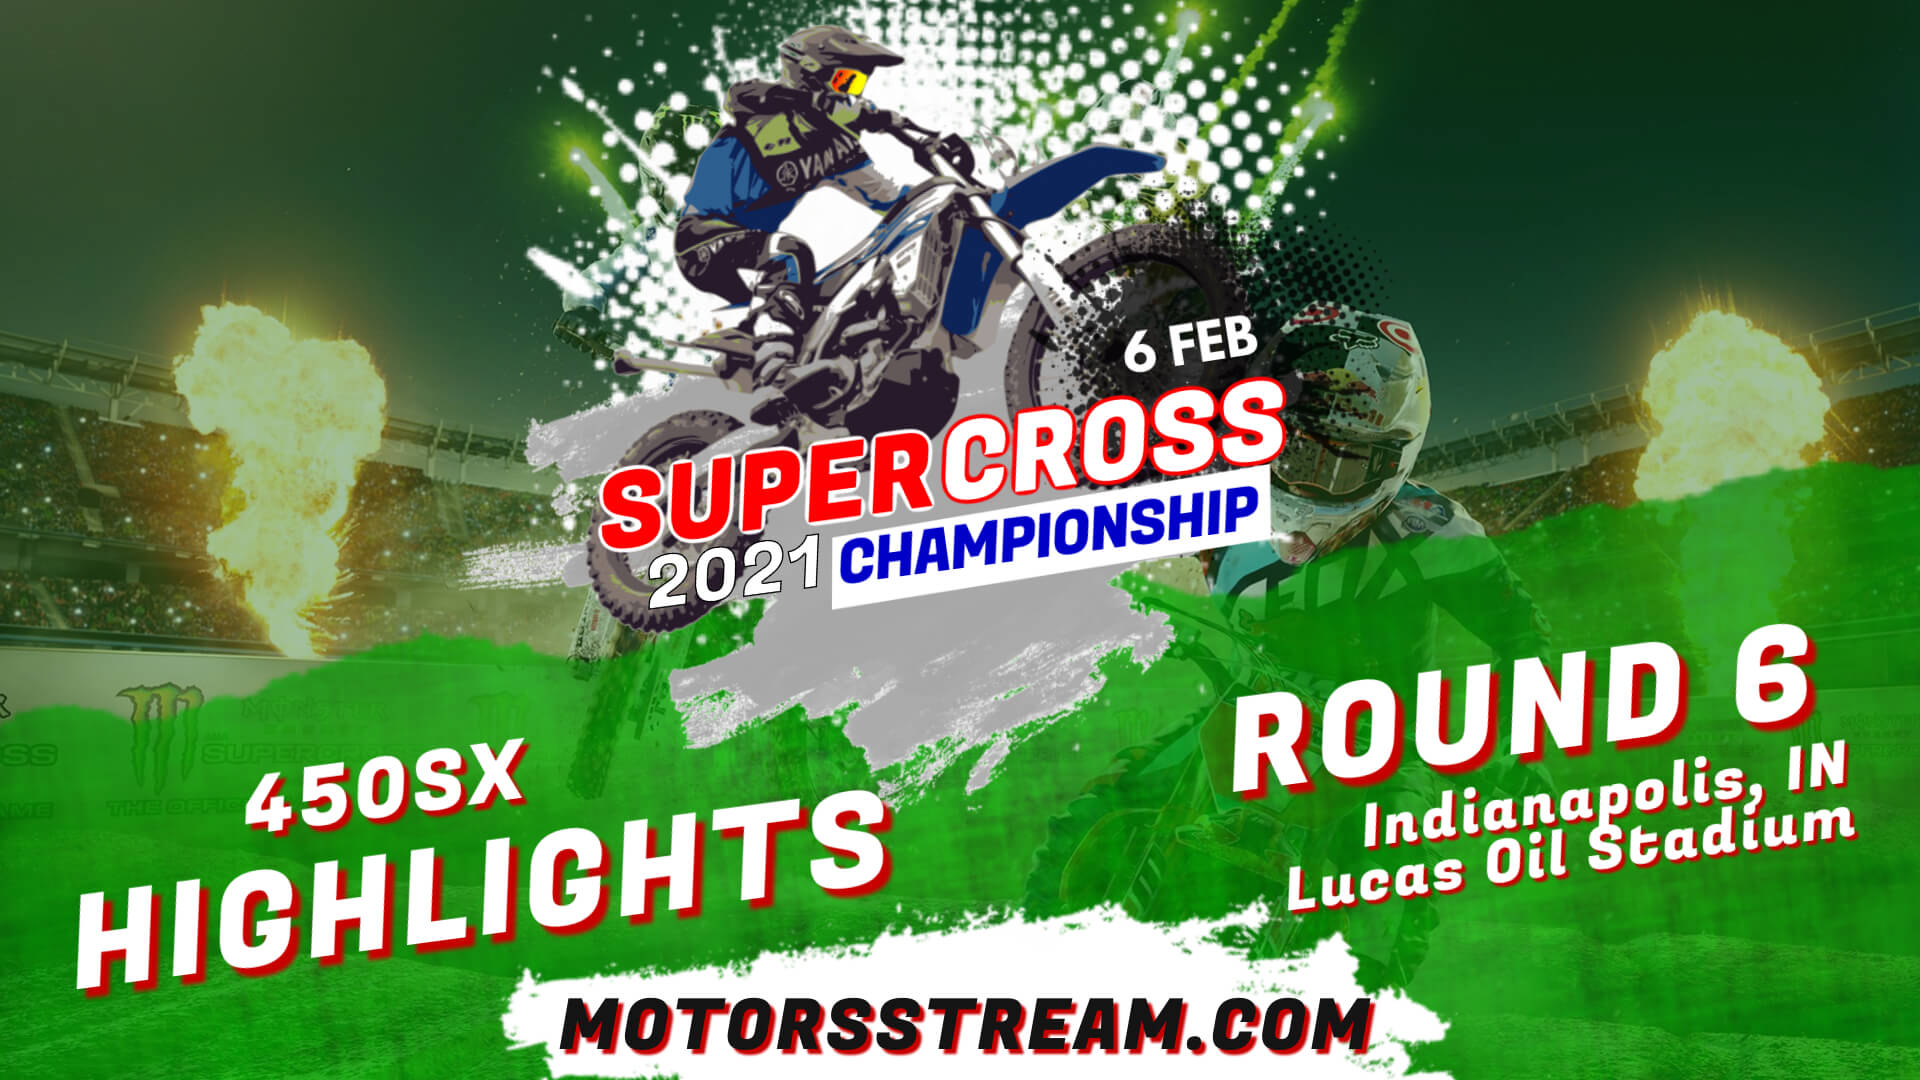 Supercross Round 6 Indianapolis 450SX Highlights 2021